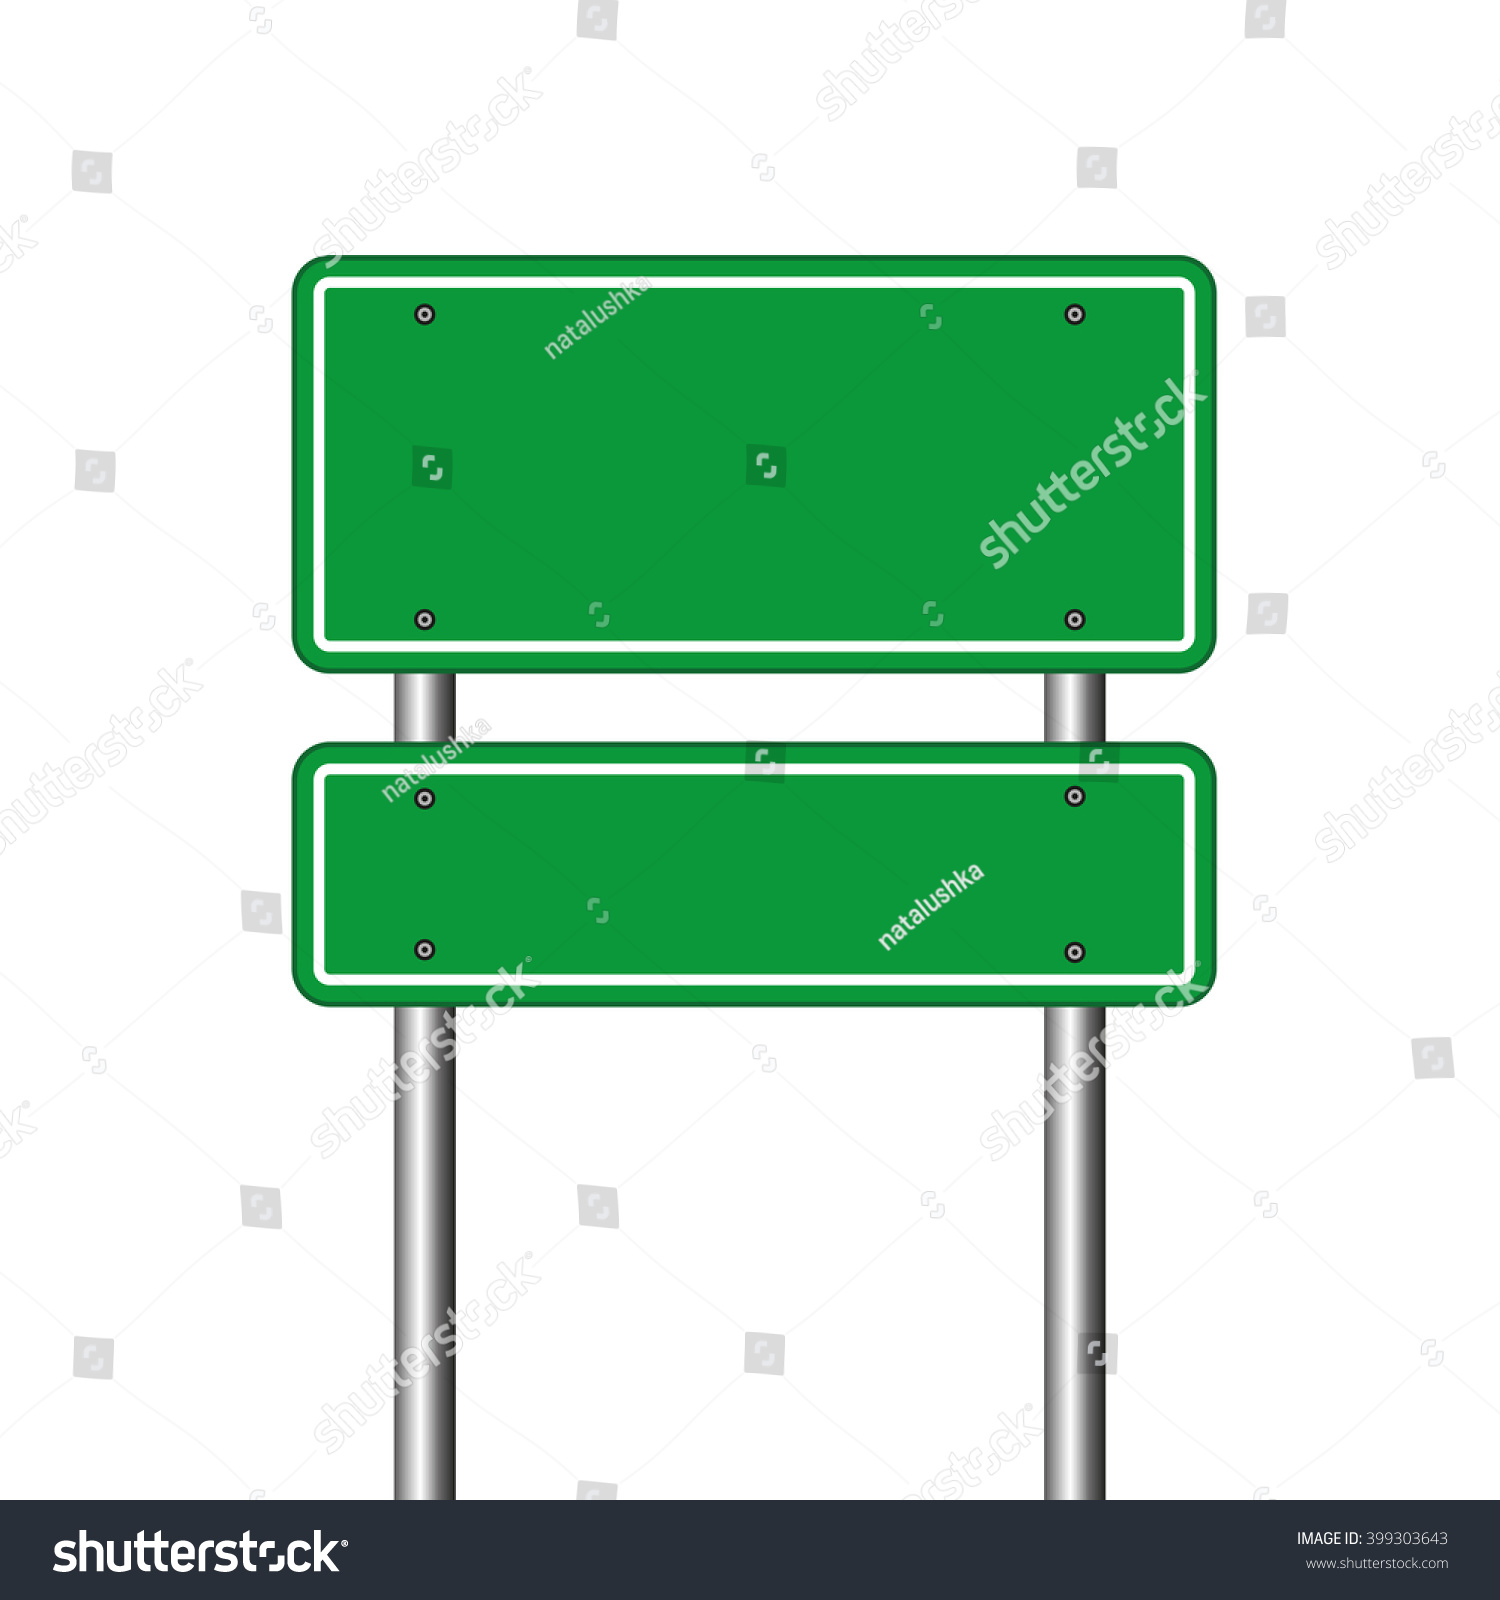 blank green road sign over white background #399303643